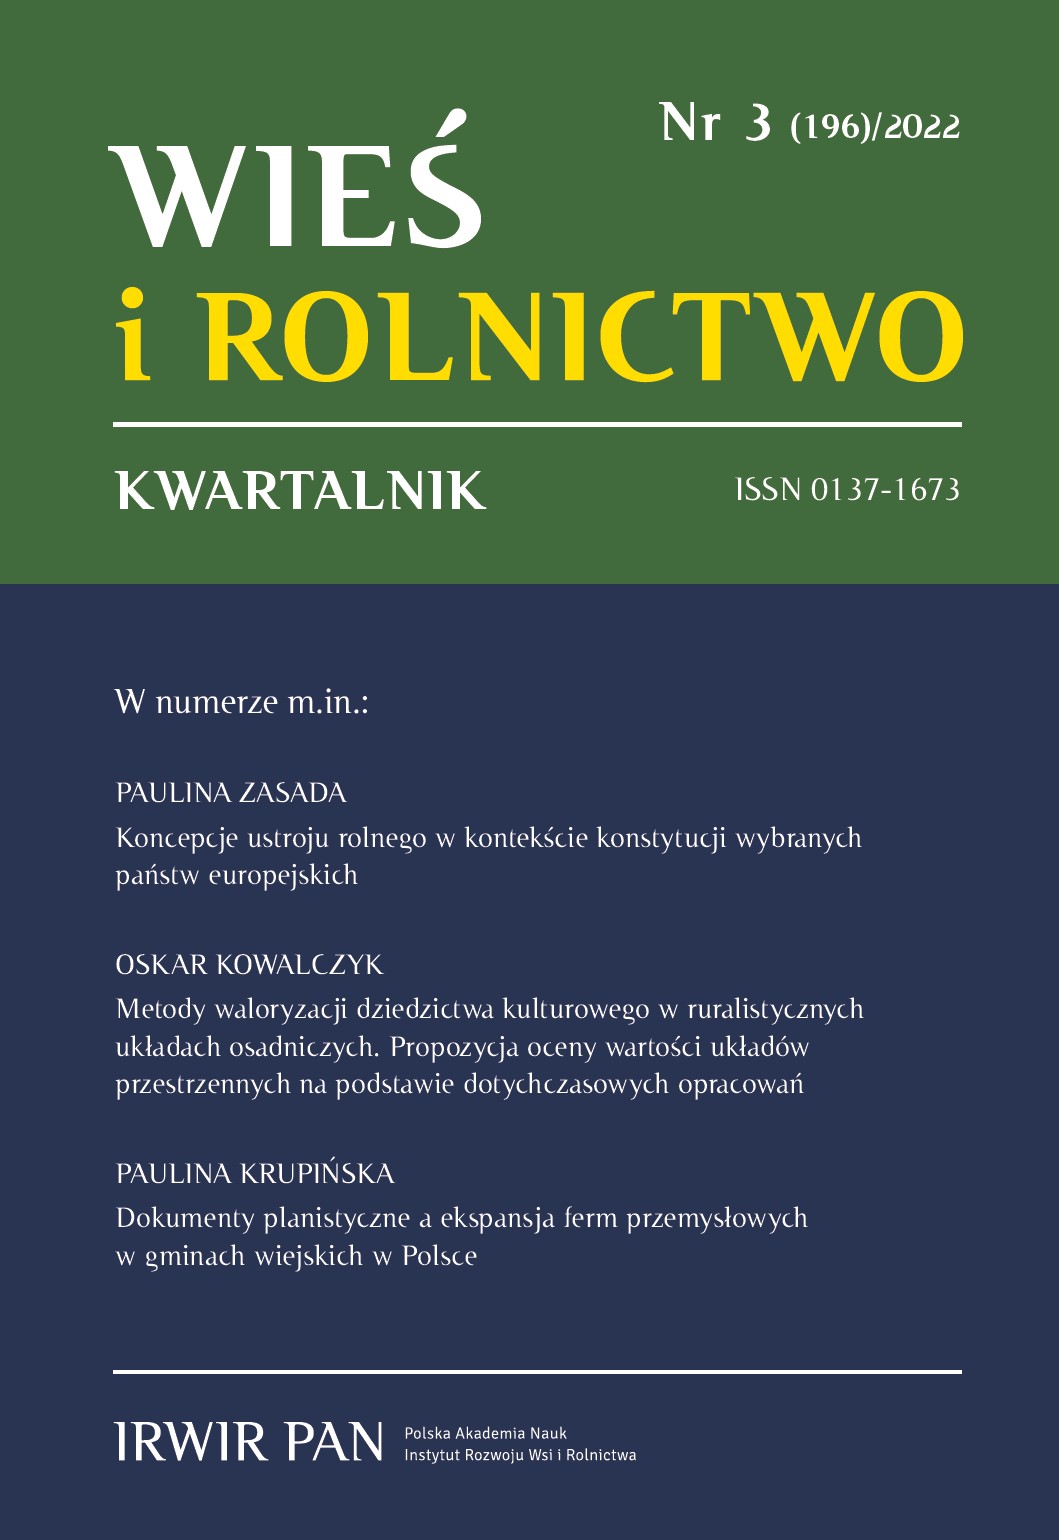 Does Polish Sociology Have a Future?
Review of Andrzej Kaleta’s book, Notes on Polish Rural Sociology Cover Image